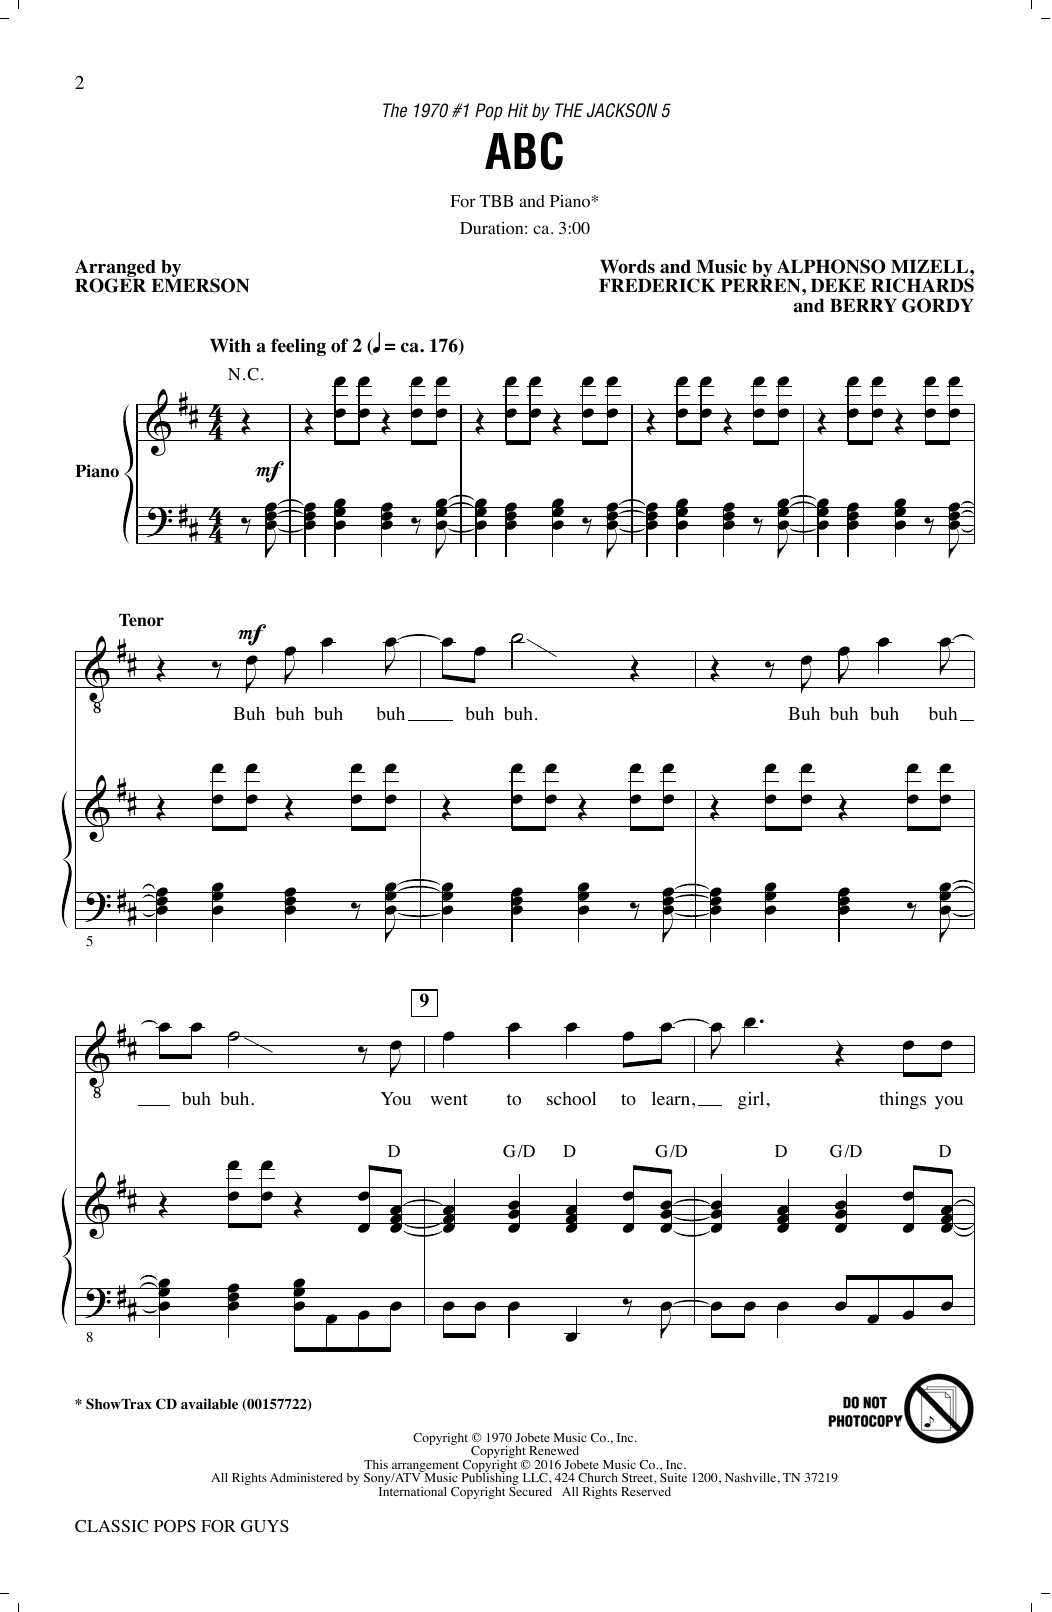 Download Roger Emerson Classic Pops For Guys (Collection) Sheet Music